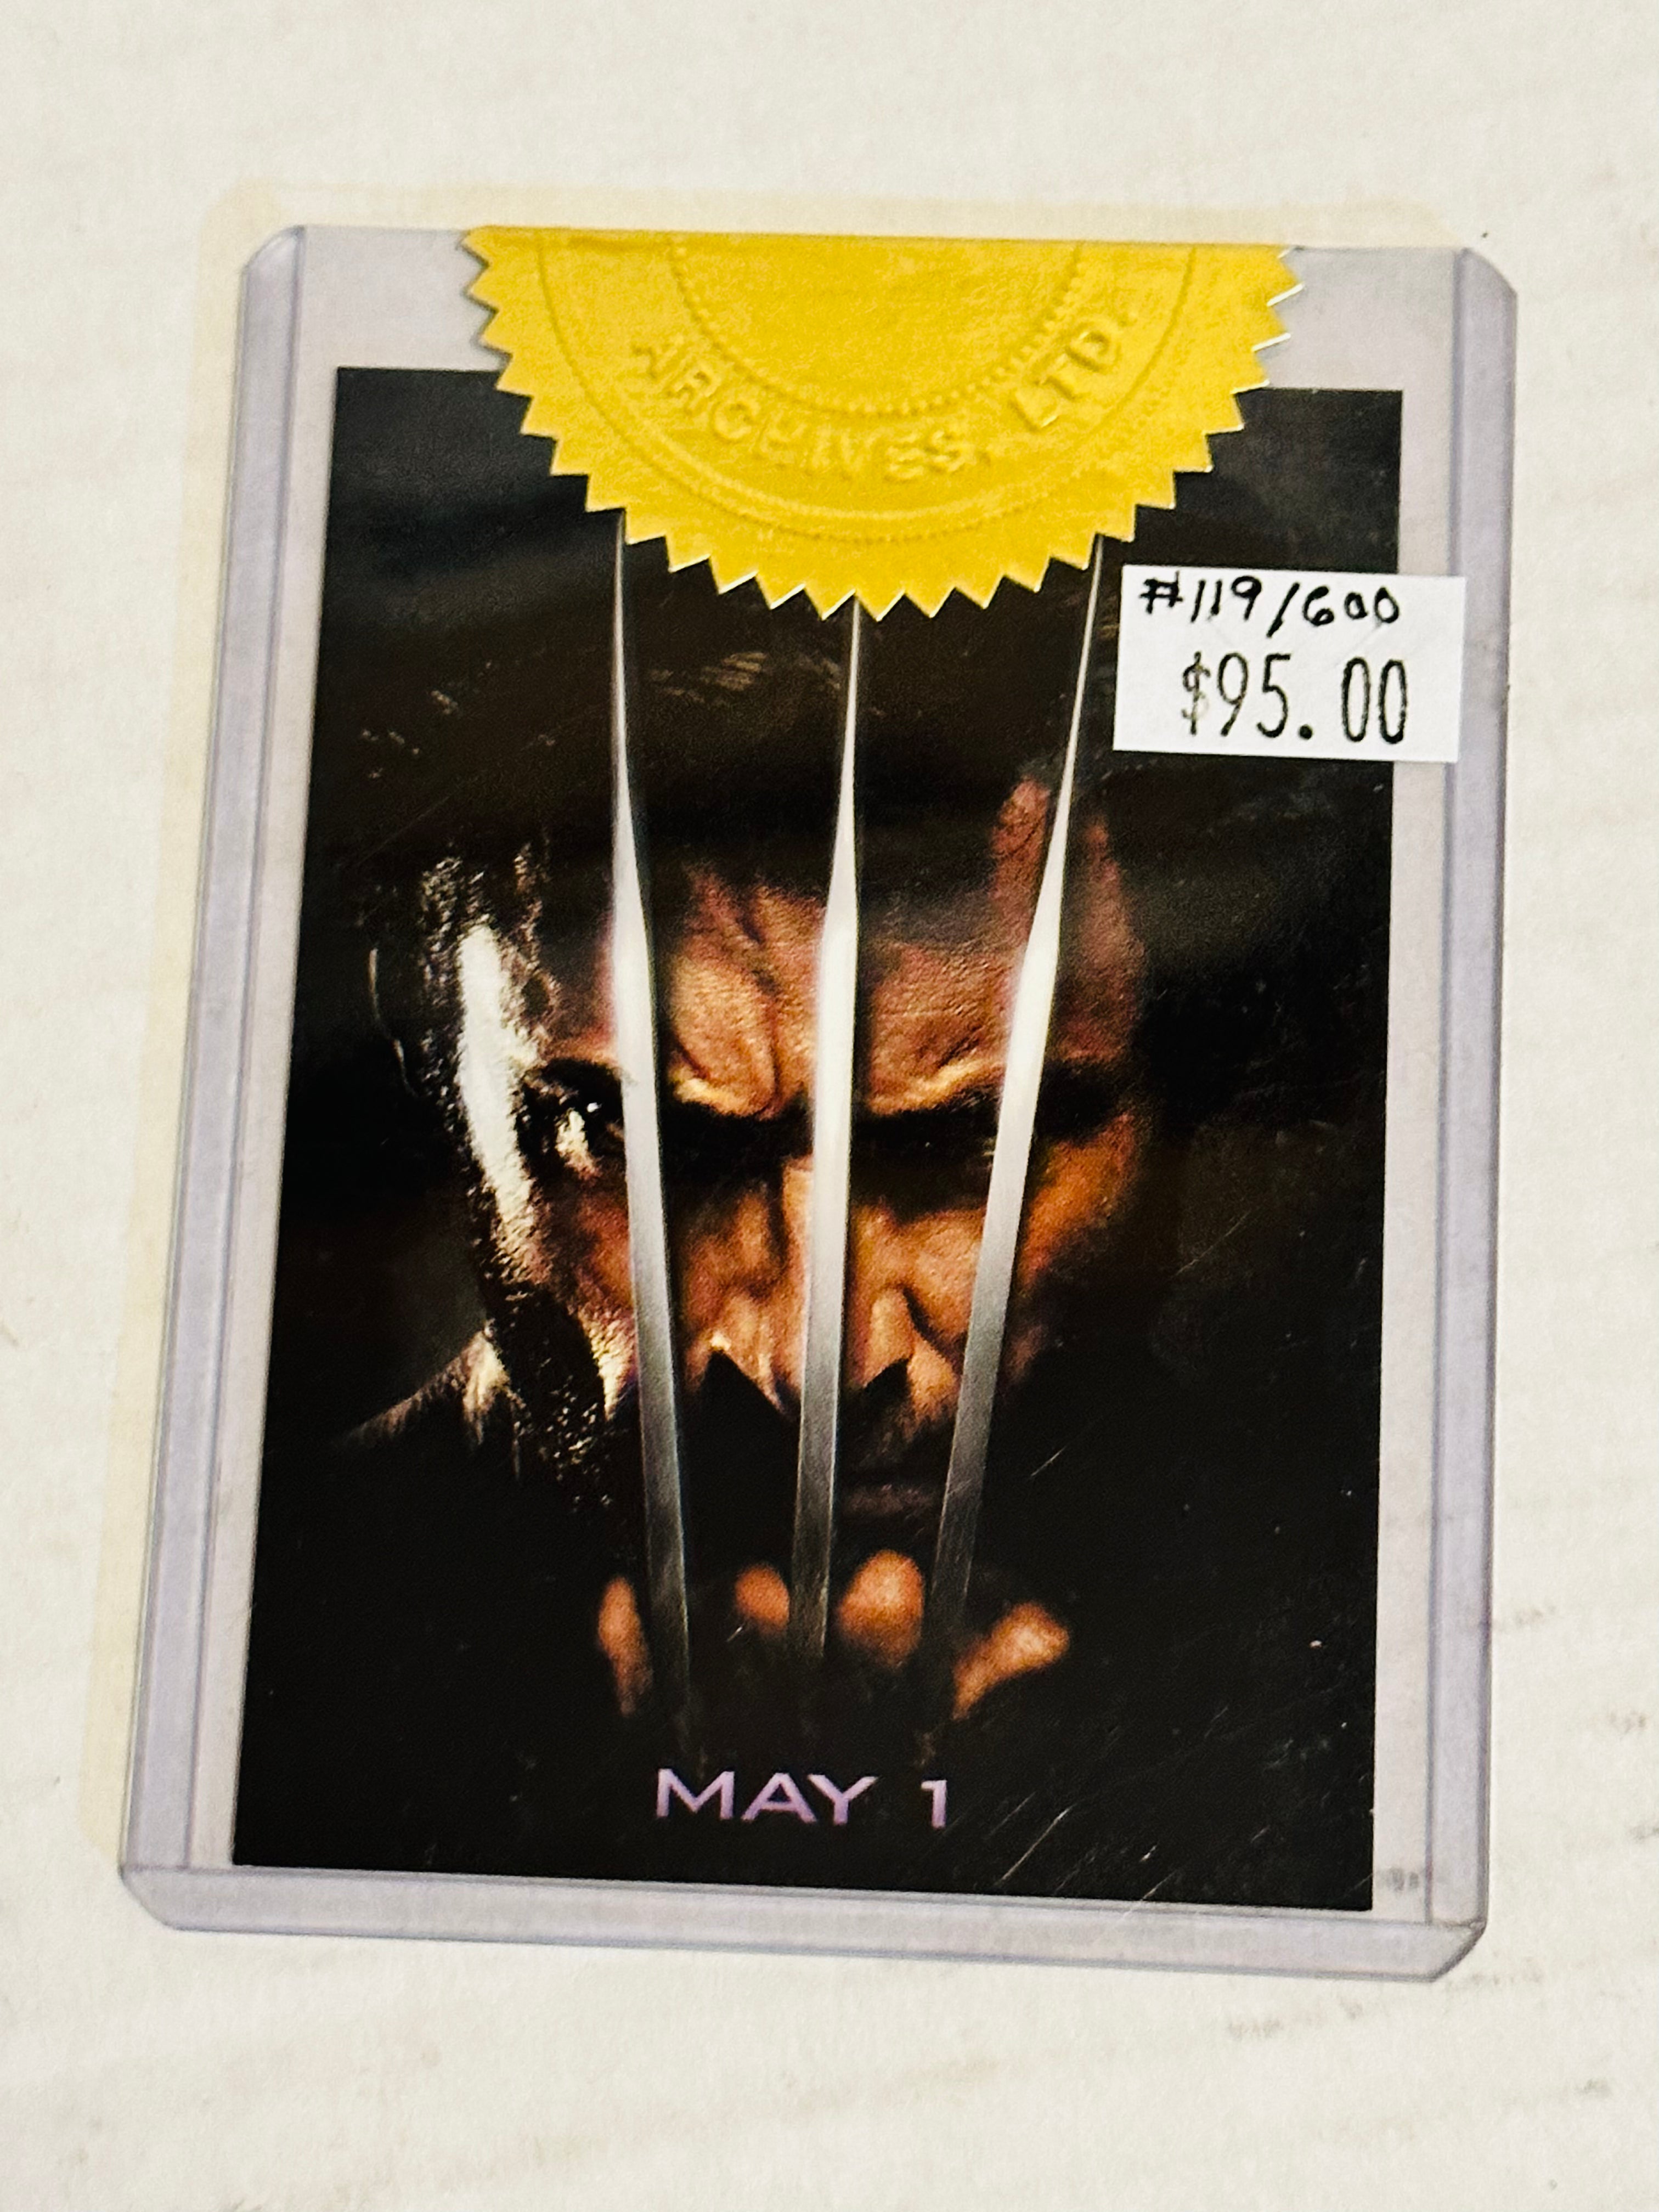 Wolverine movie rare numbered case Topper insert card 2009